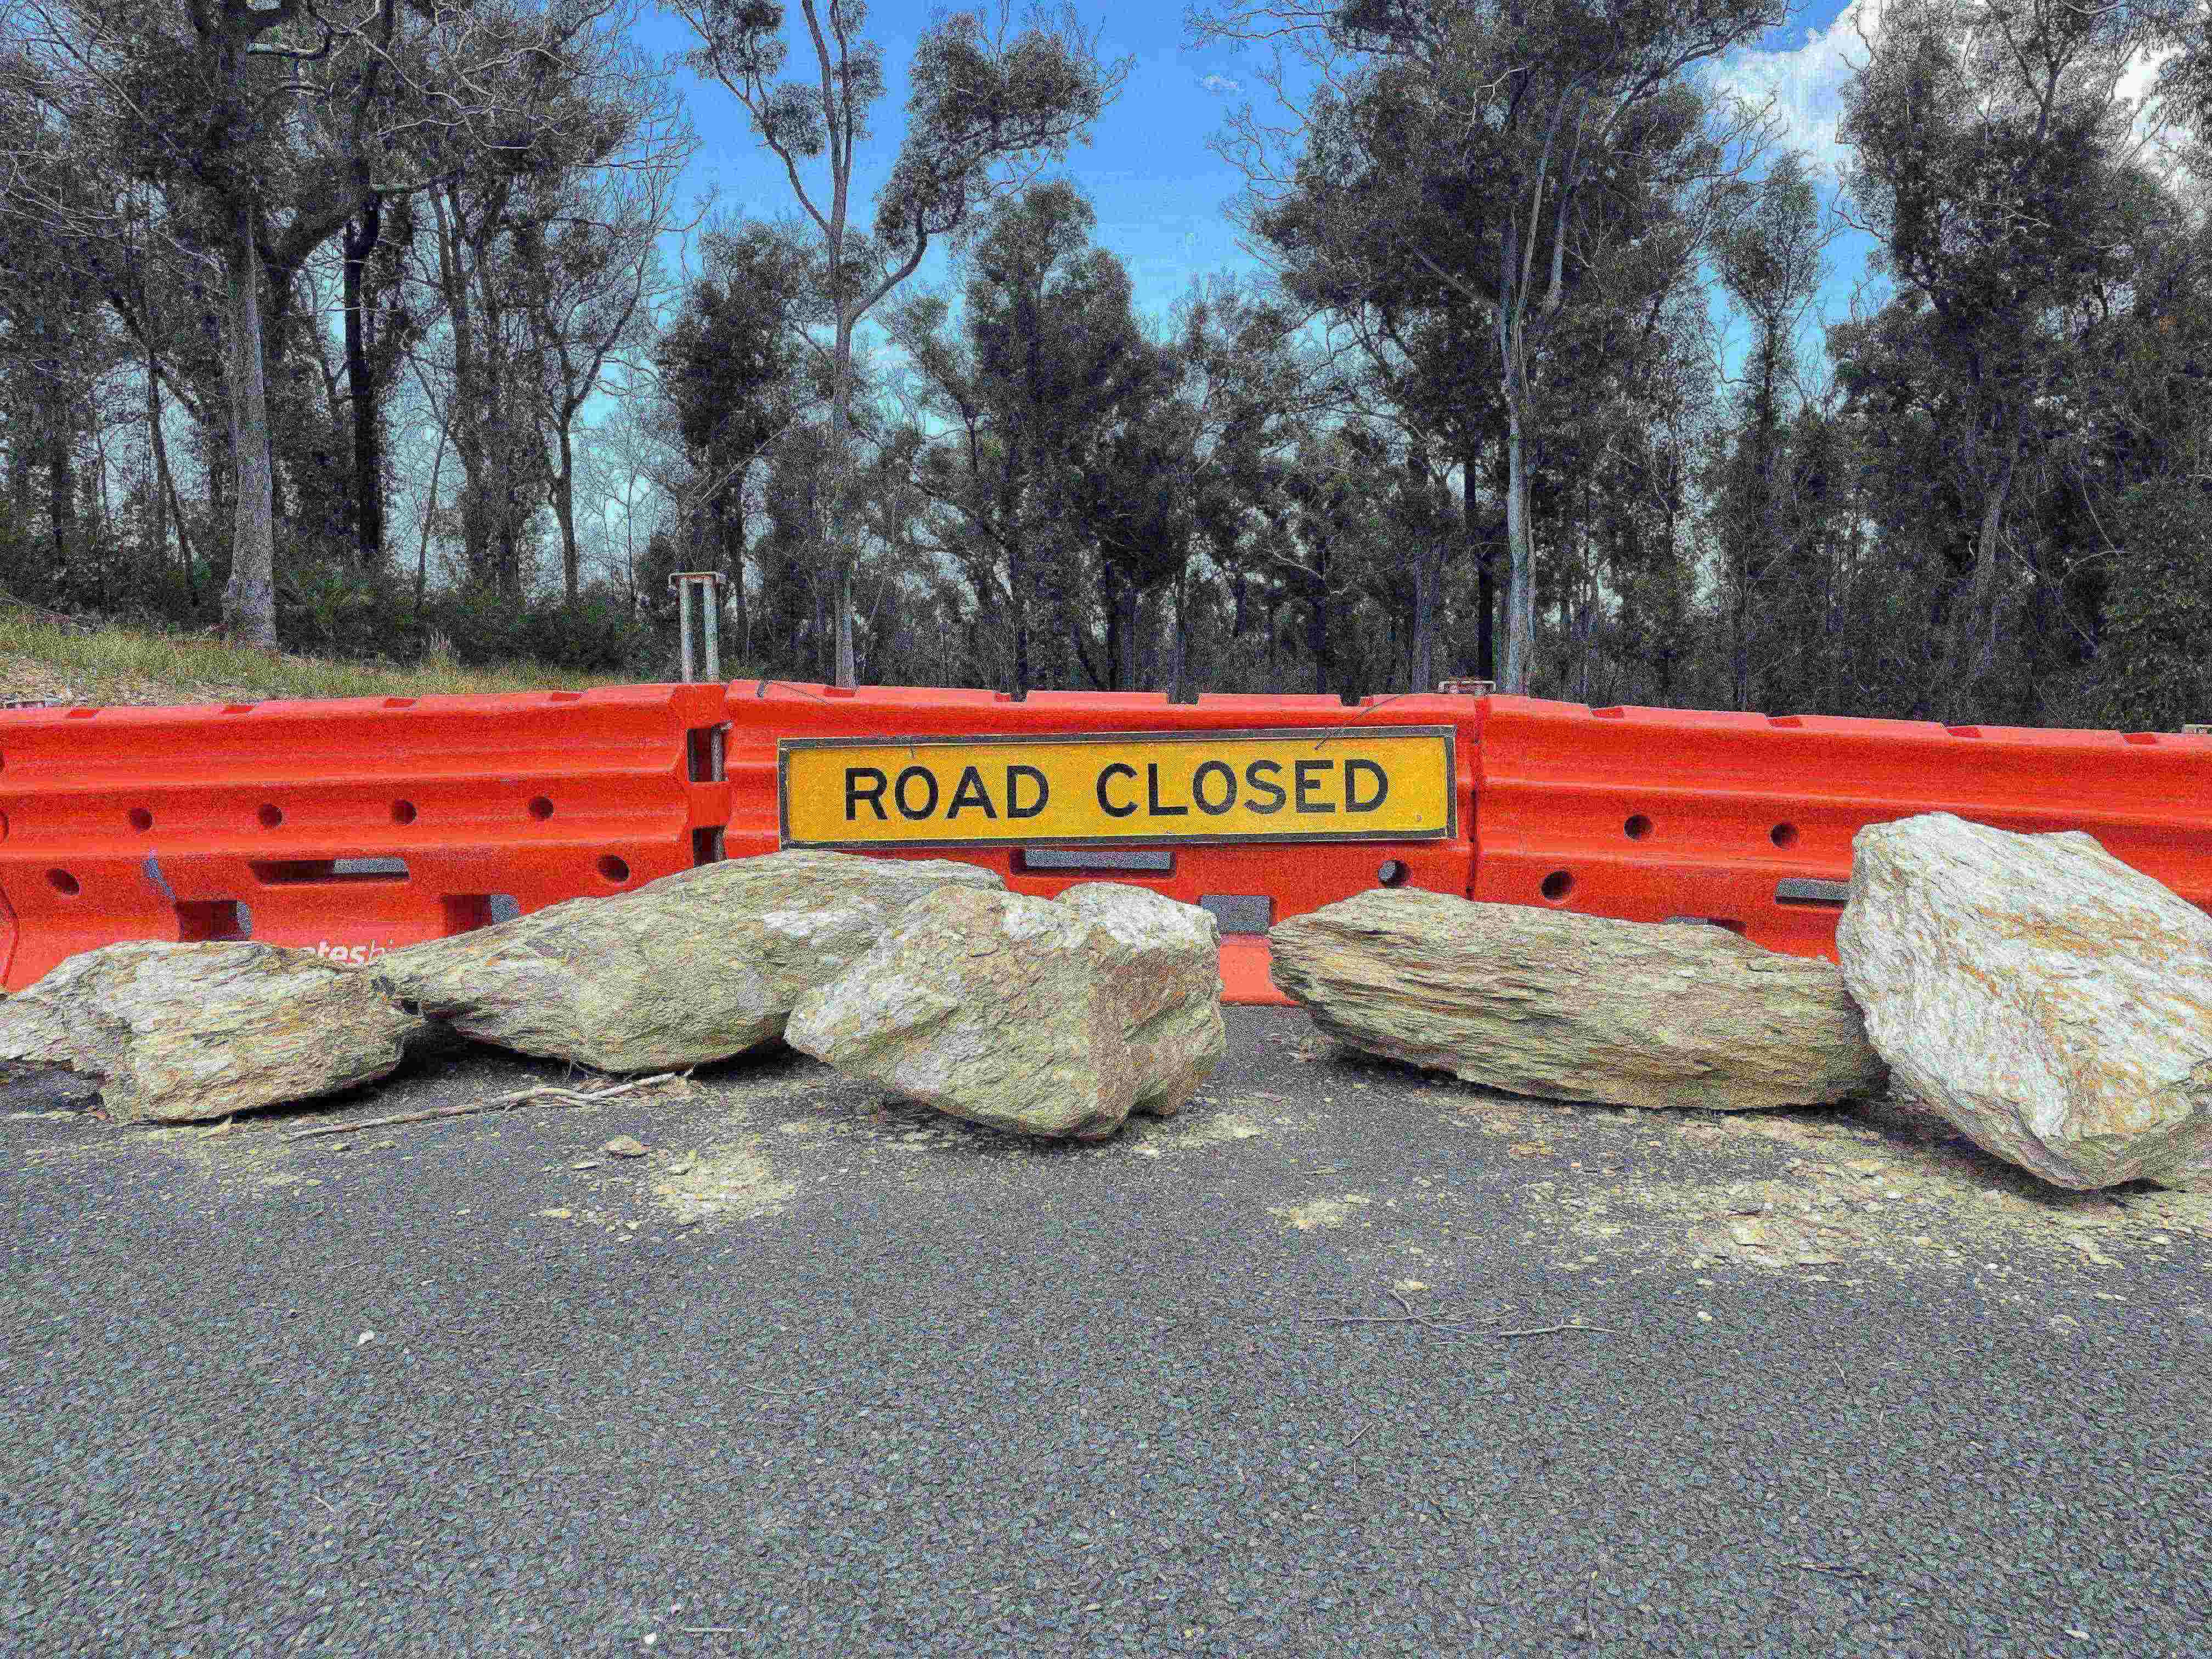 Lengthy road closure a dead end for South Coast businesses